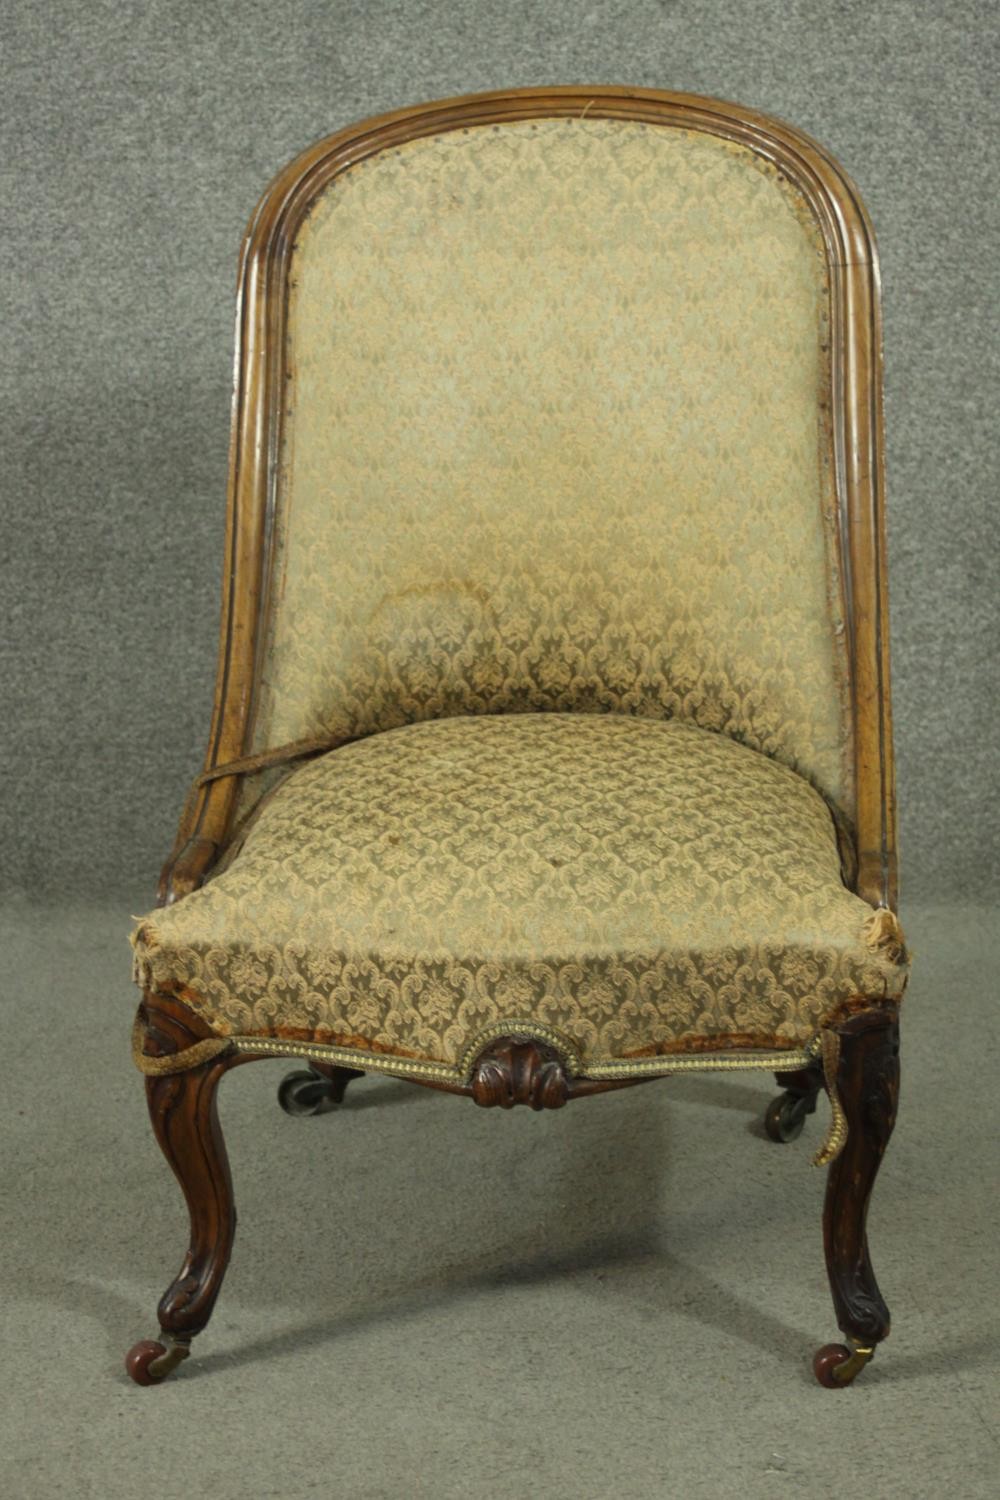 A Victorian walnut nursing chair, upholstered in green fabric, on carved cabriole legs.